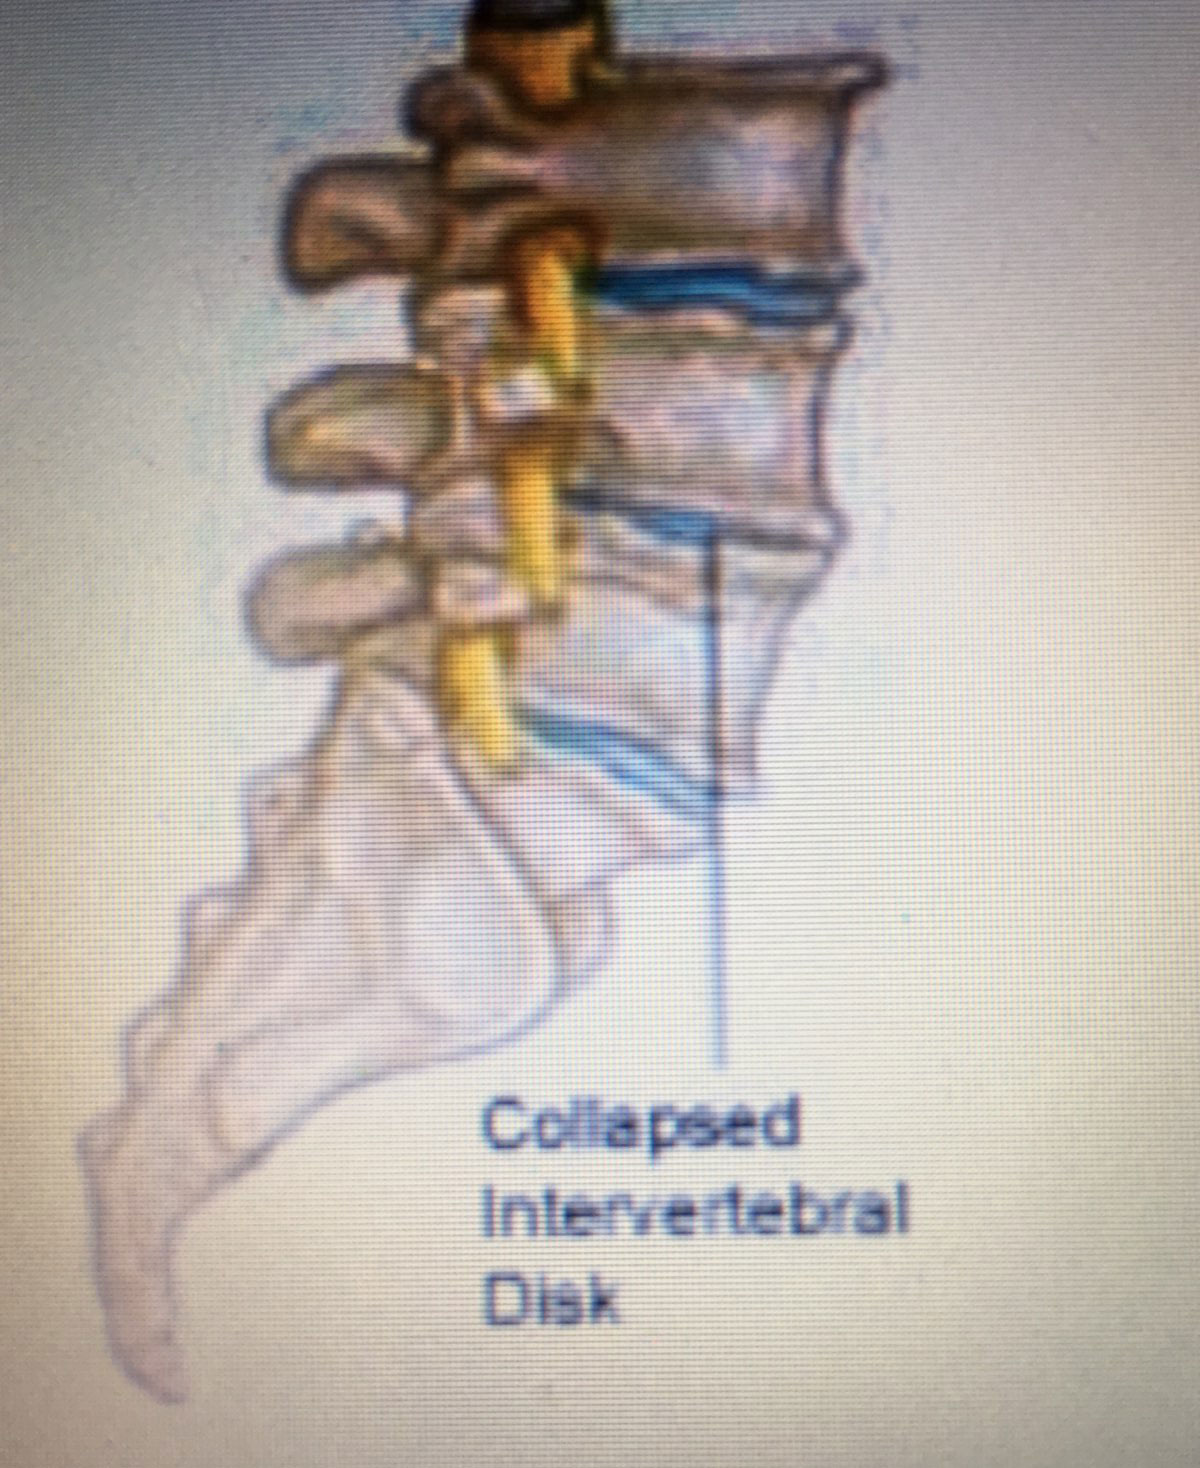 Collapsed Disk Physical Rehabilitation Clinton Township Michigan, Collapsed Intervertebral Disk Physical Rehabilitation Clinton Twp MI